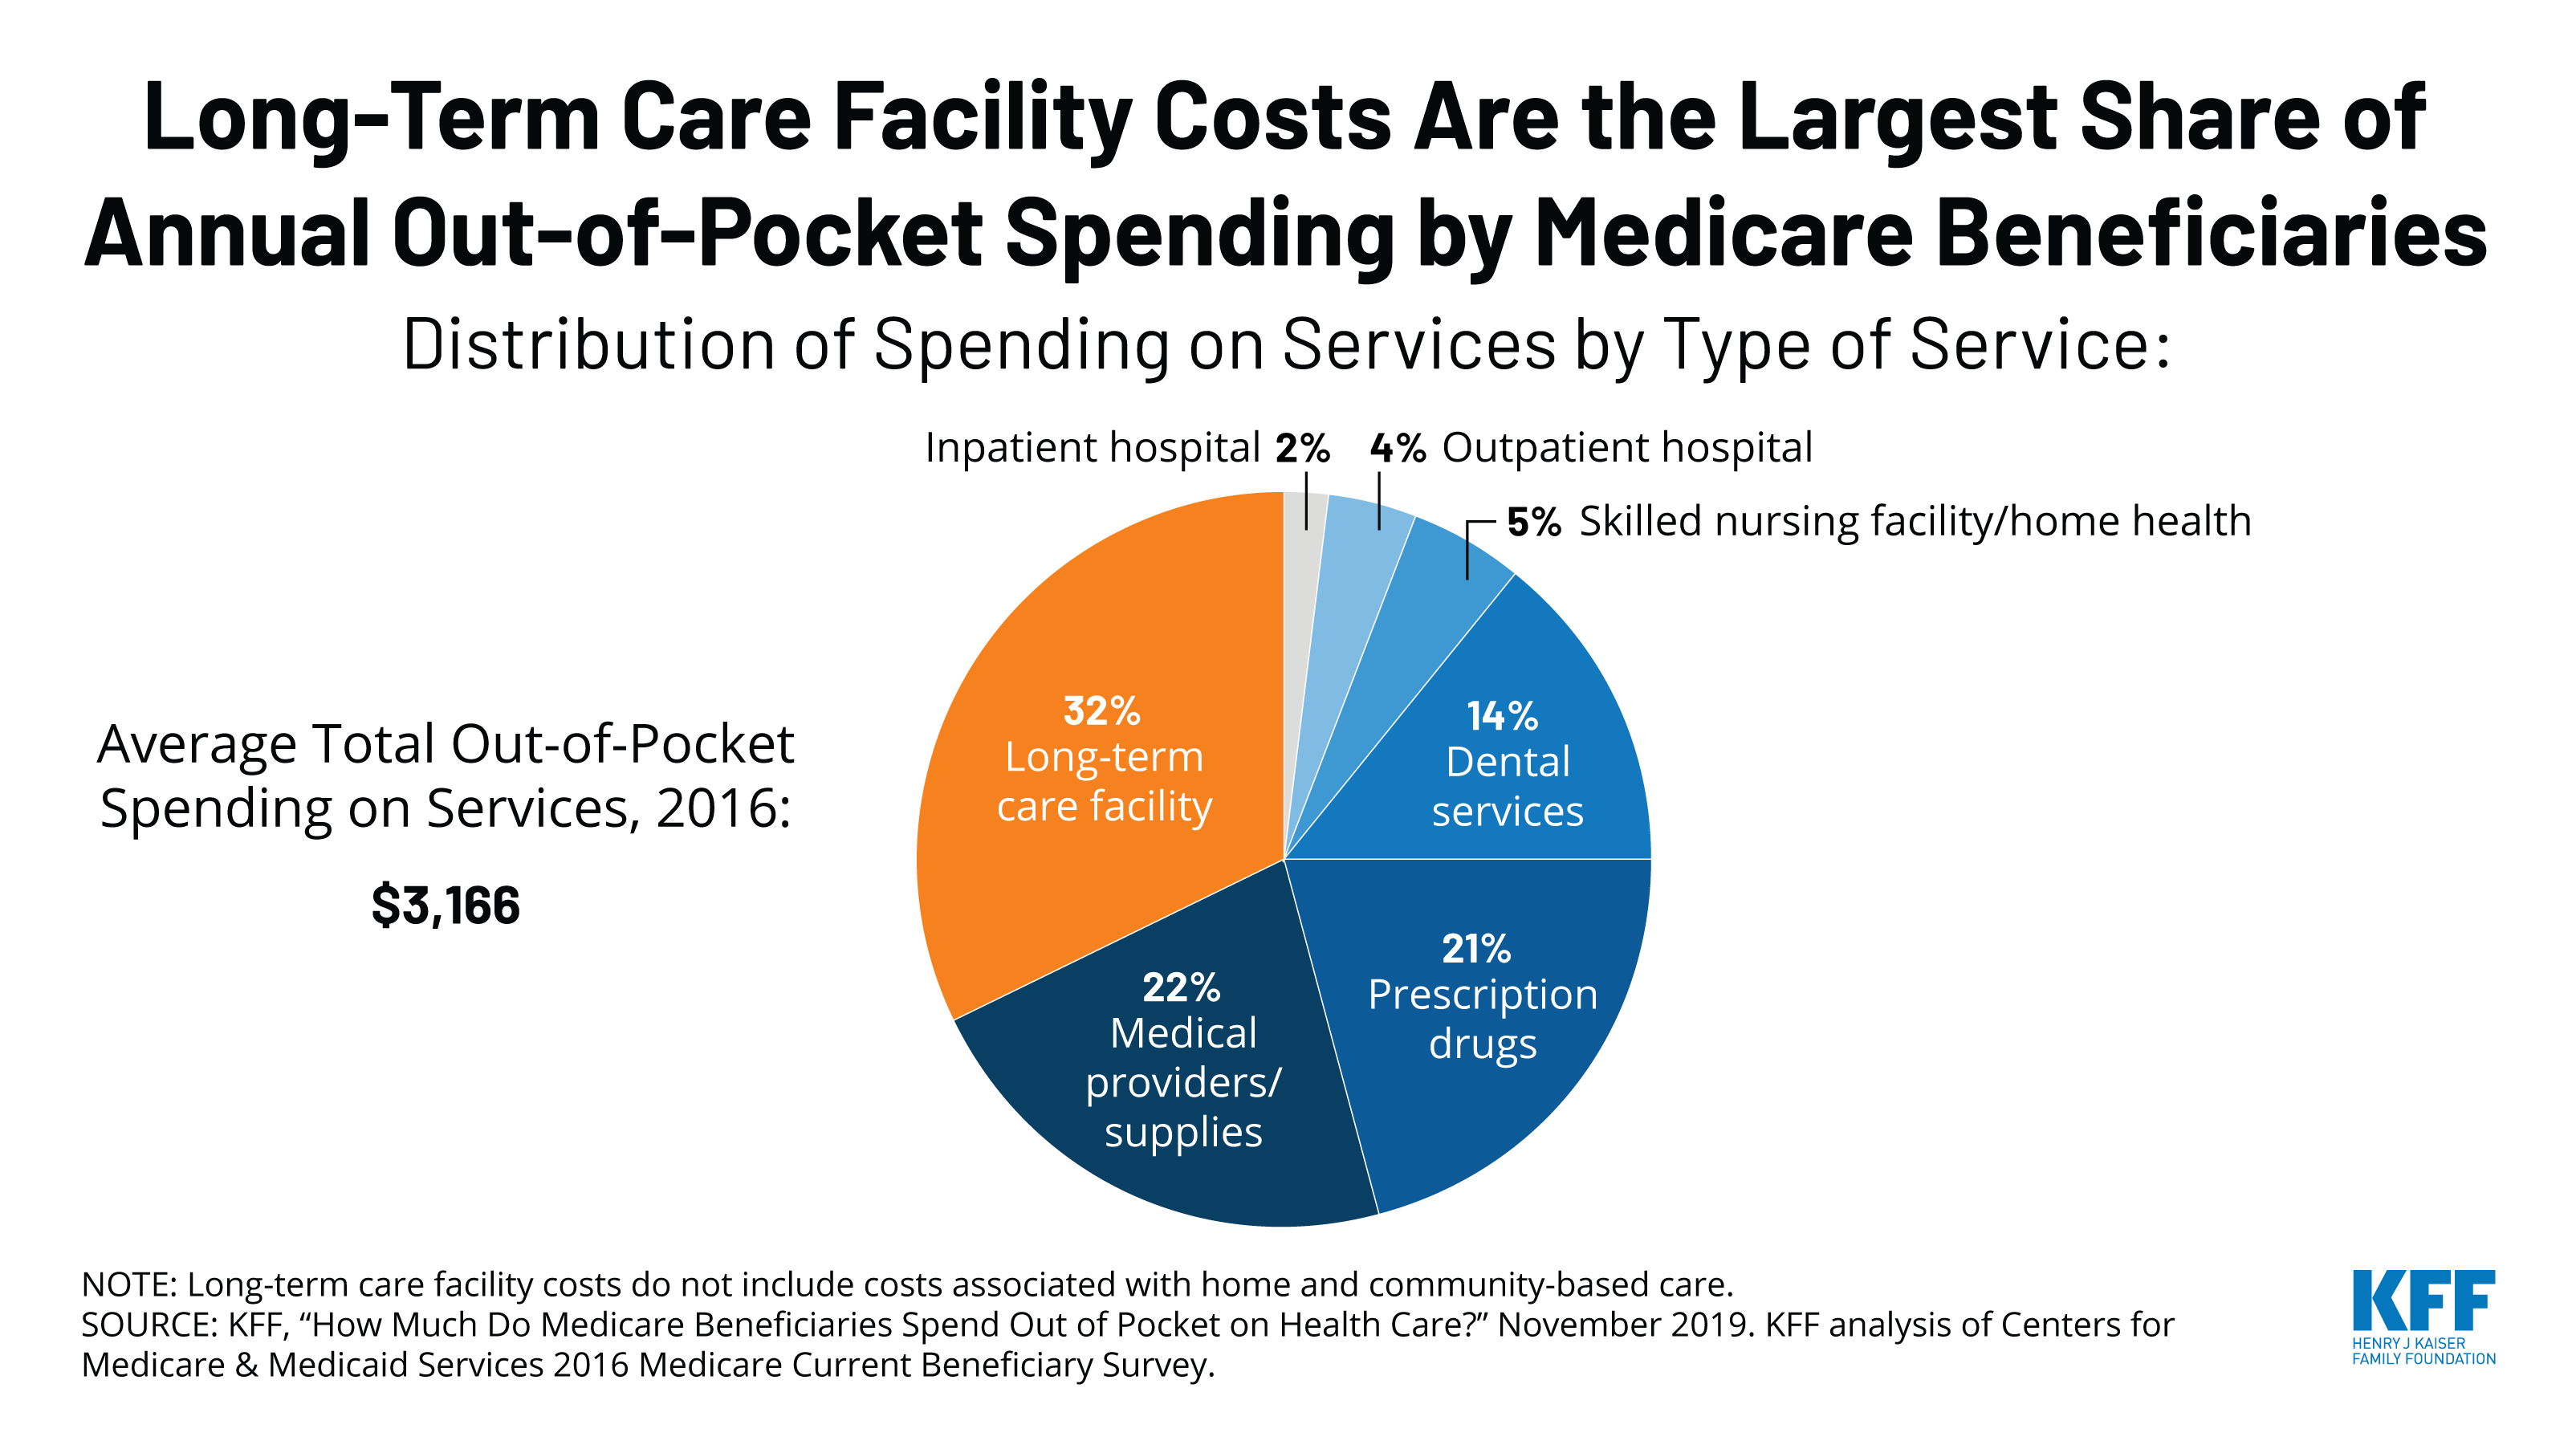 Long-Term Care Facility Costs Are the Largest Share of Annual Out-of